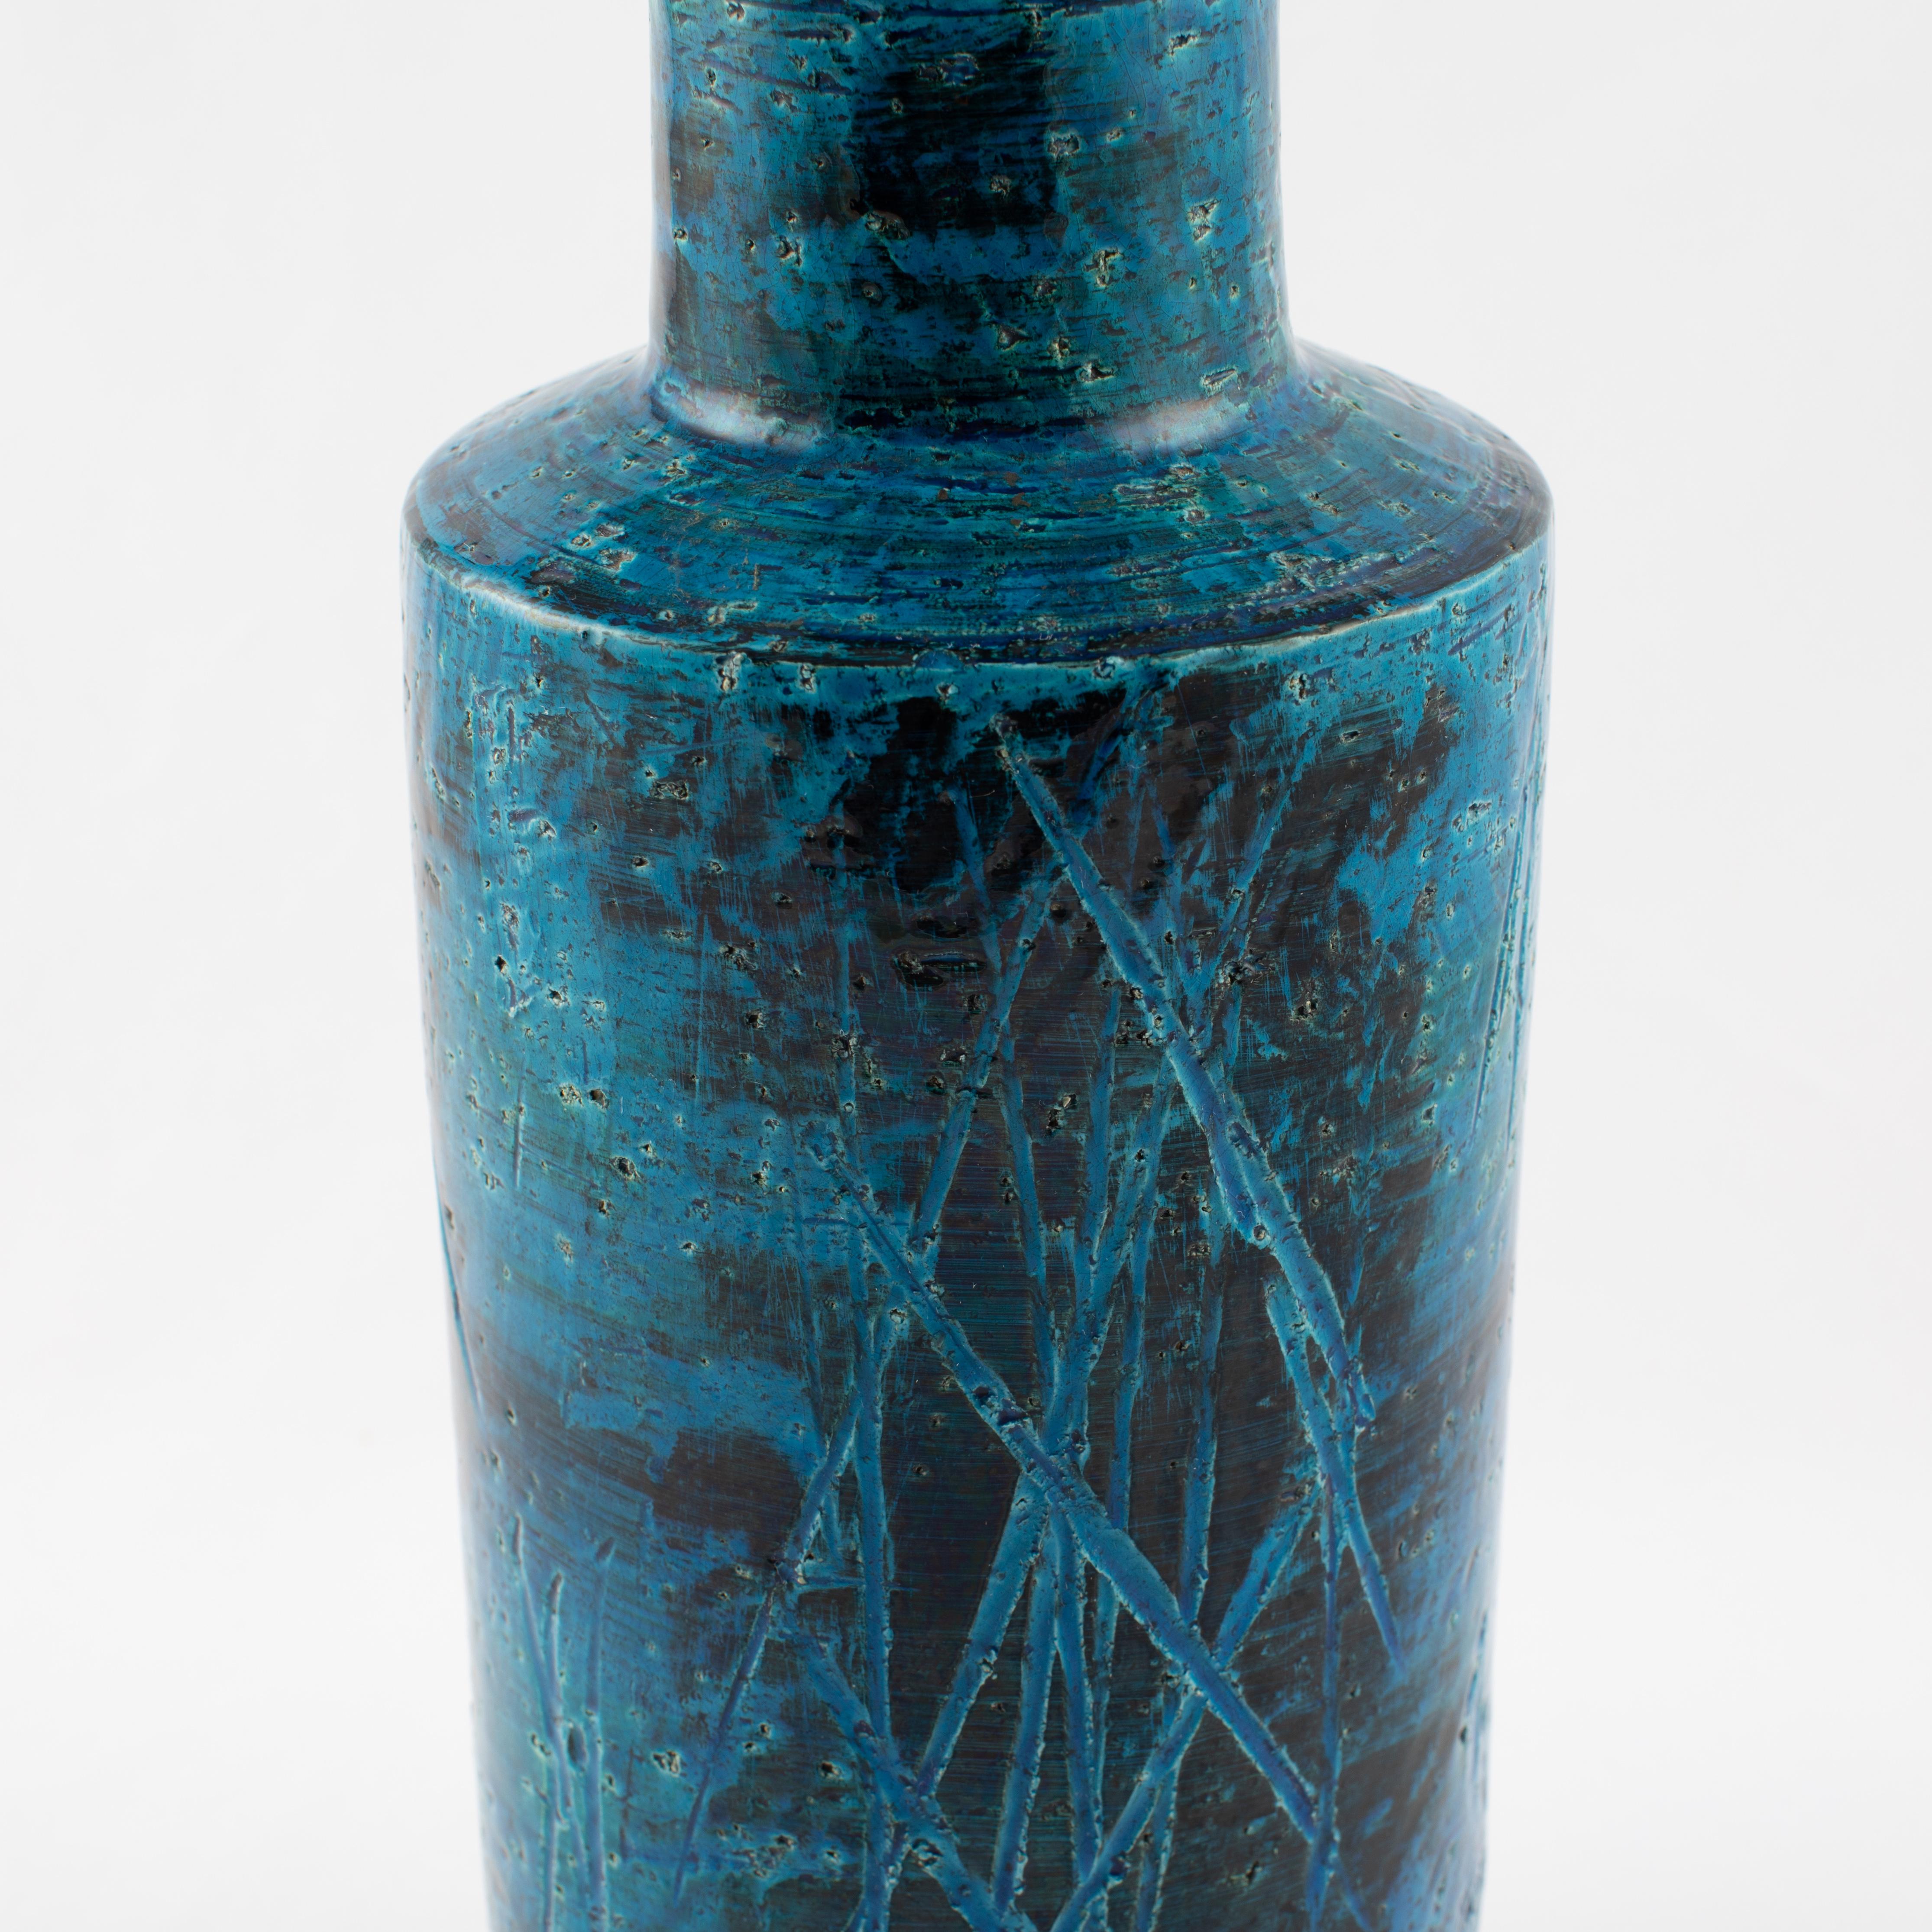 Aldo Londi for Bitossi Blue and Black Cylindrical Vase, circa 1960s For Sale 2